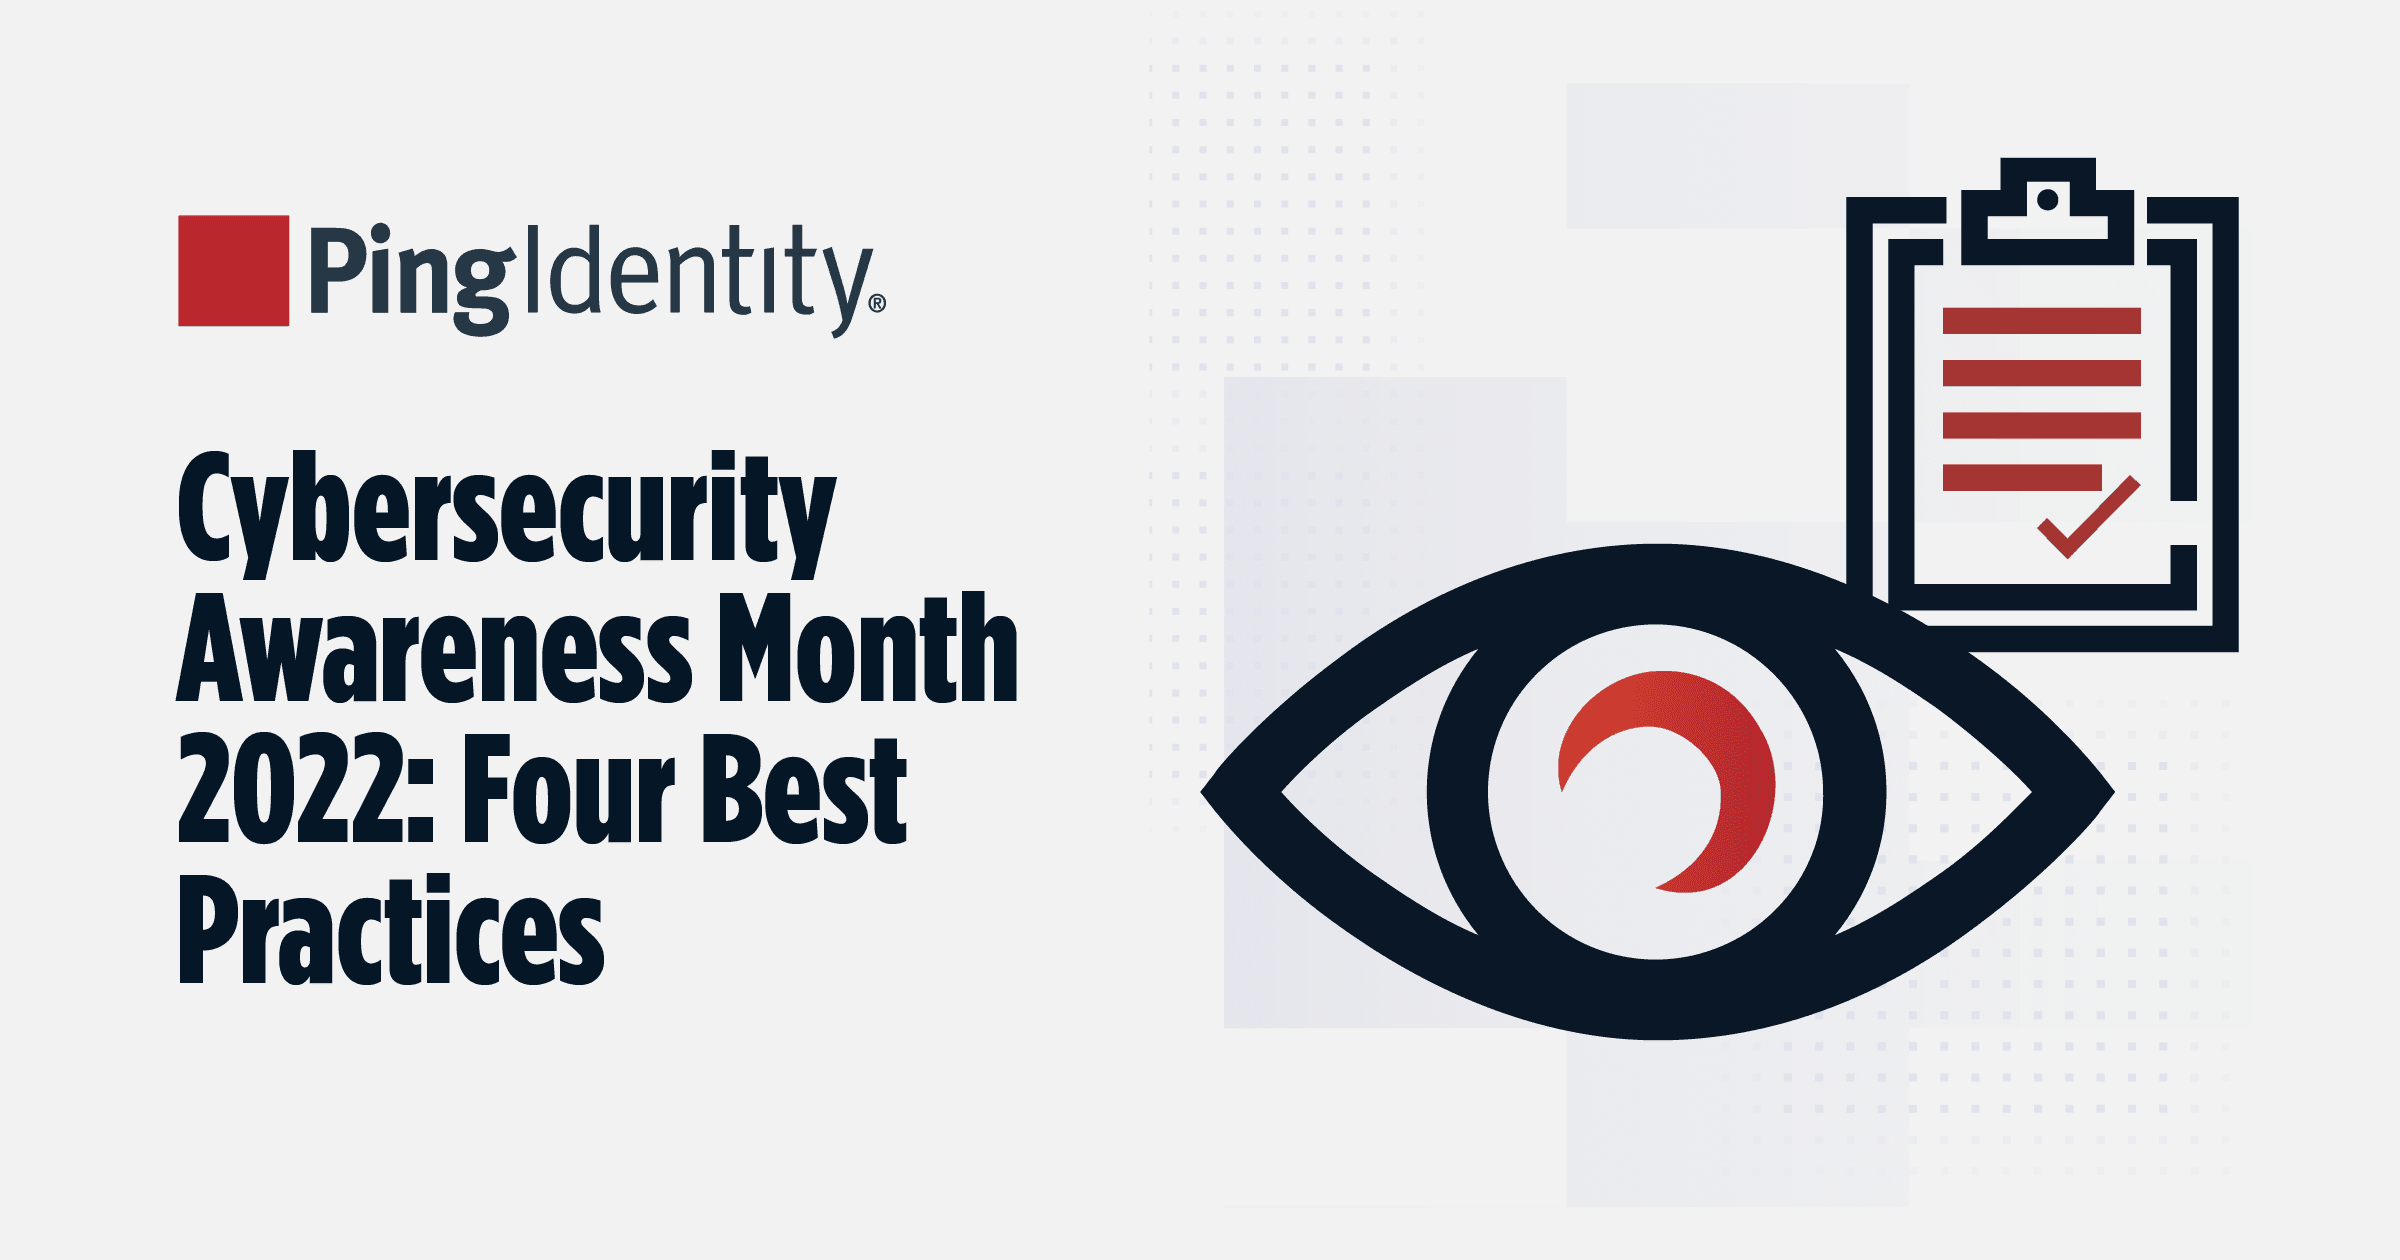 A blog's open graph image titled 'Cybersecurity Awareness Month 2022: Four Best Practices' and bearing a Ping Identity logo.